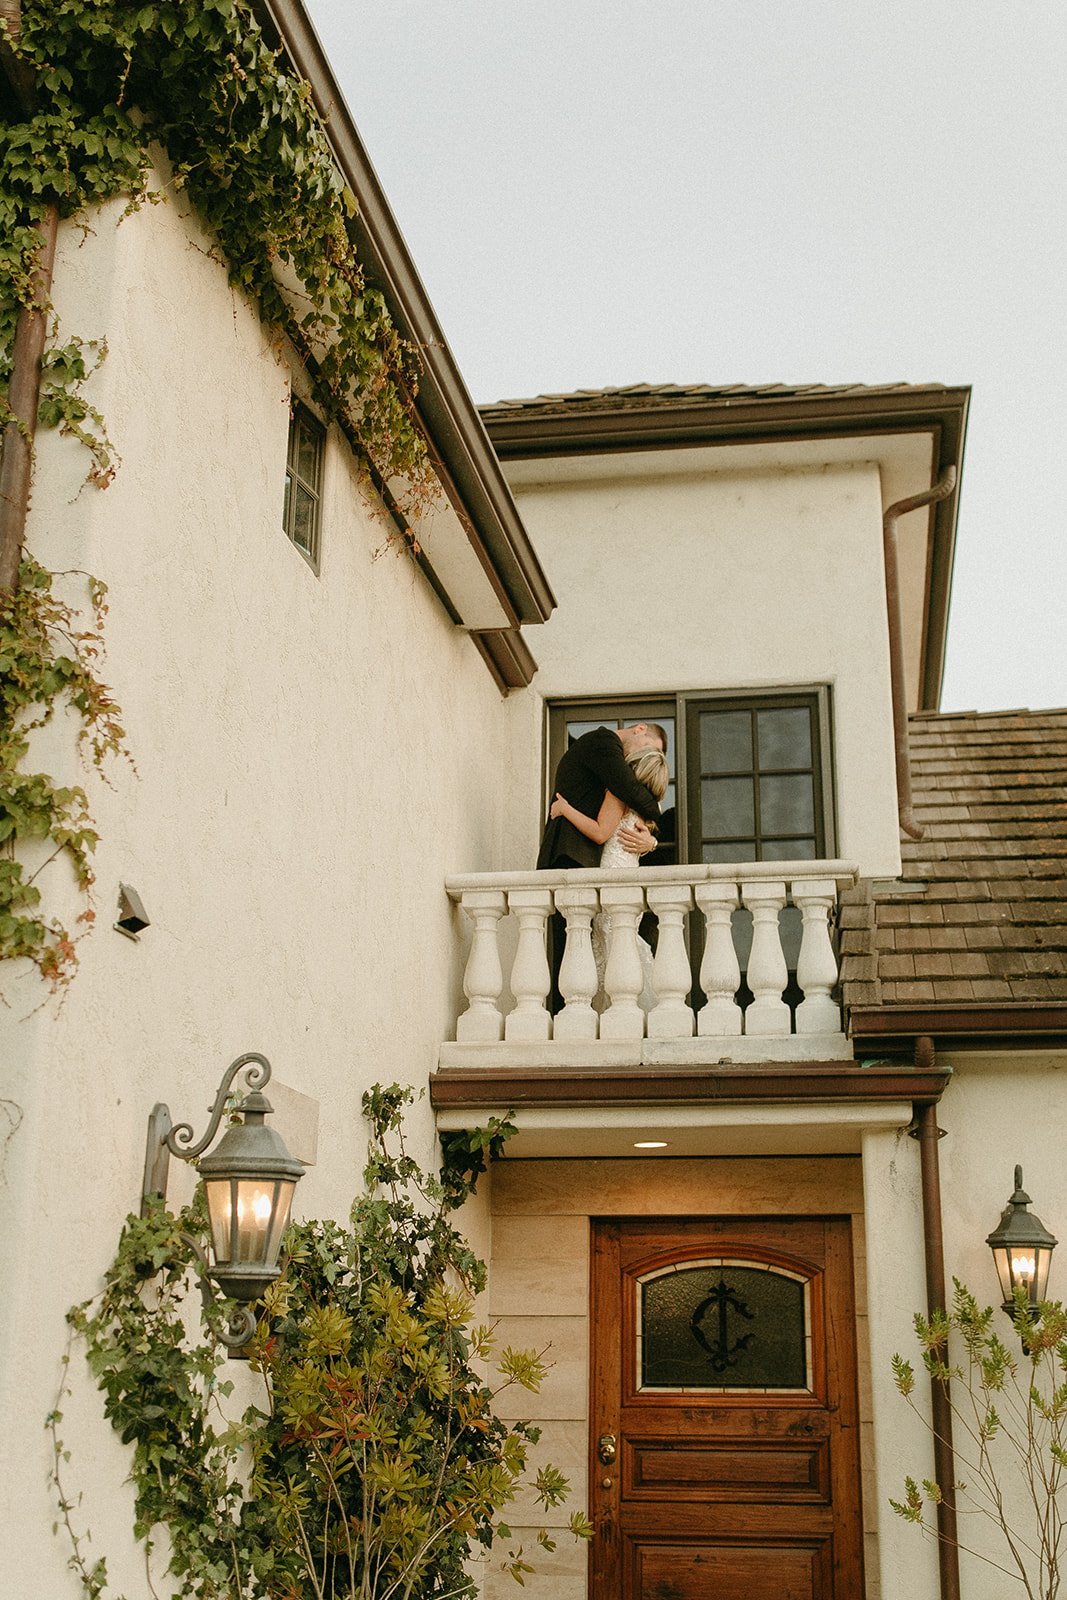 A Dreamy Carmel-by-the-Sea Wedding with all white wedding details and rustic decor